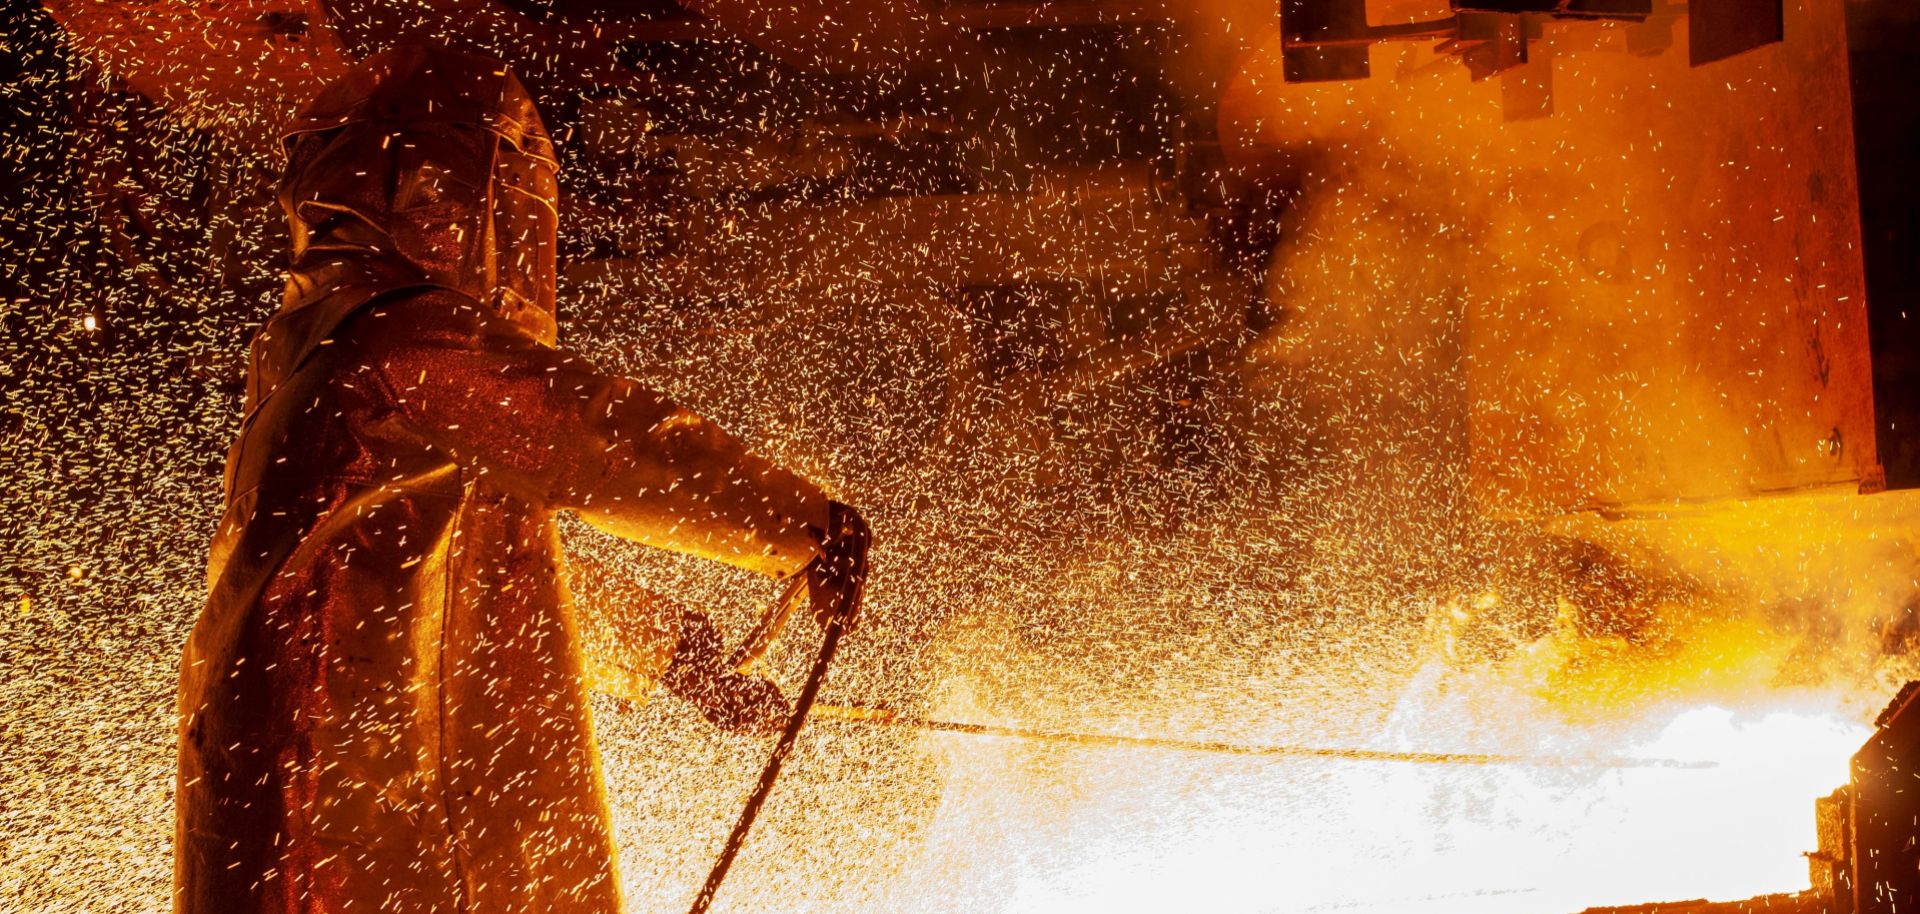 A worker uses a furnace during the nickel smelting process at Indonesian mining company PT Vale Indonesia's smelting plant in Soroako, South Sulawesi province, on March 30, 2019.